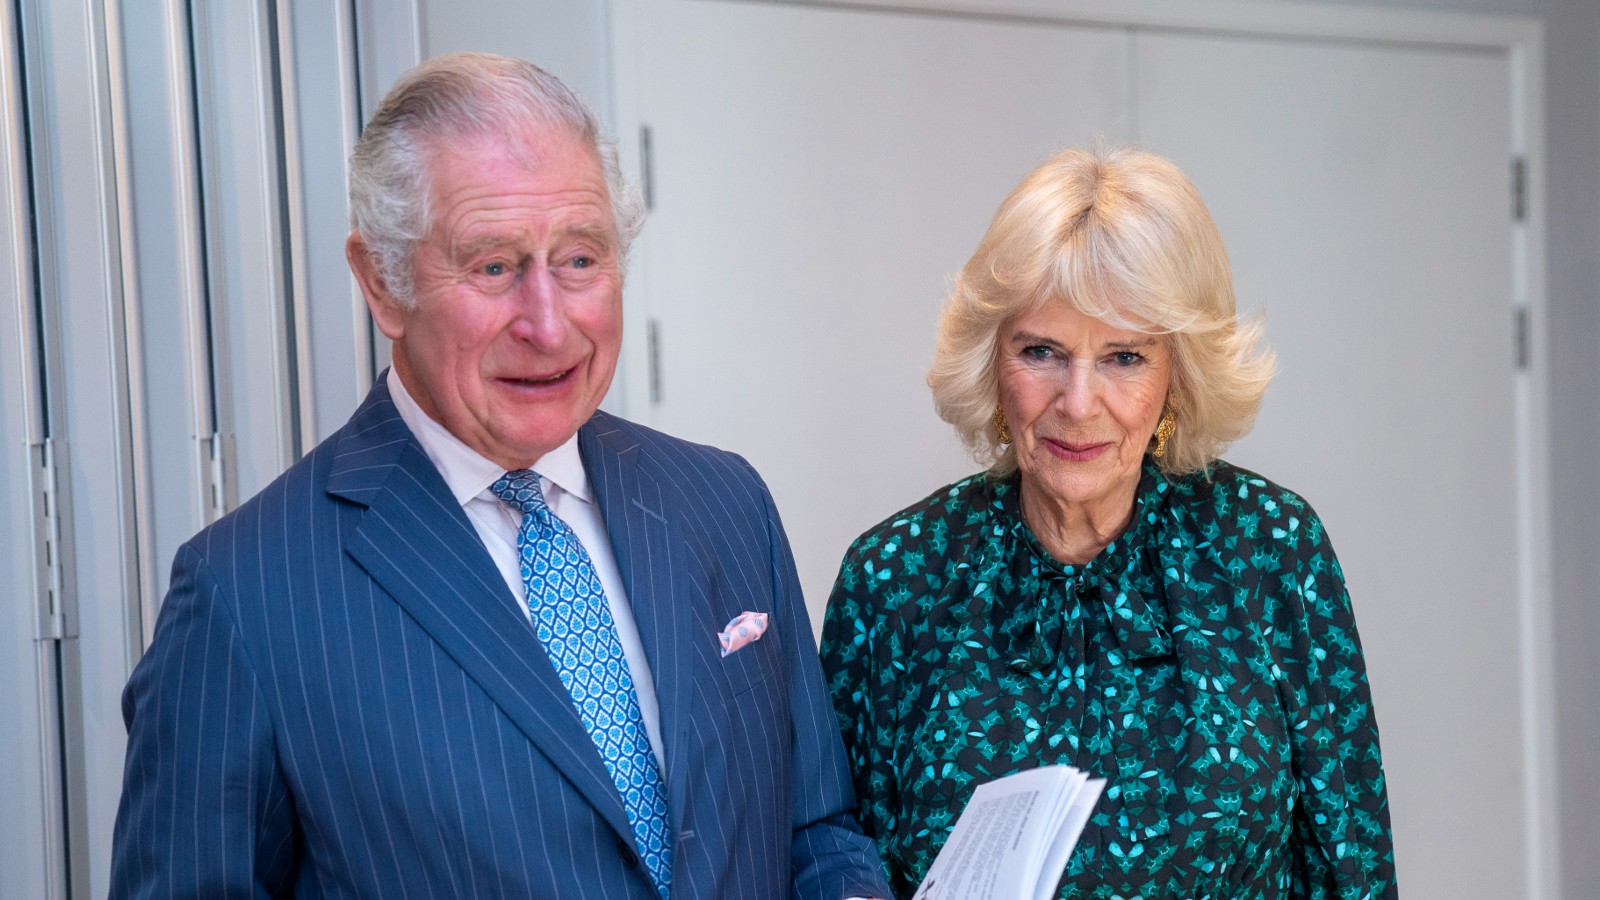 Prince Charles has Camilla in fits of laughter at event | Woman & Home